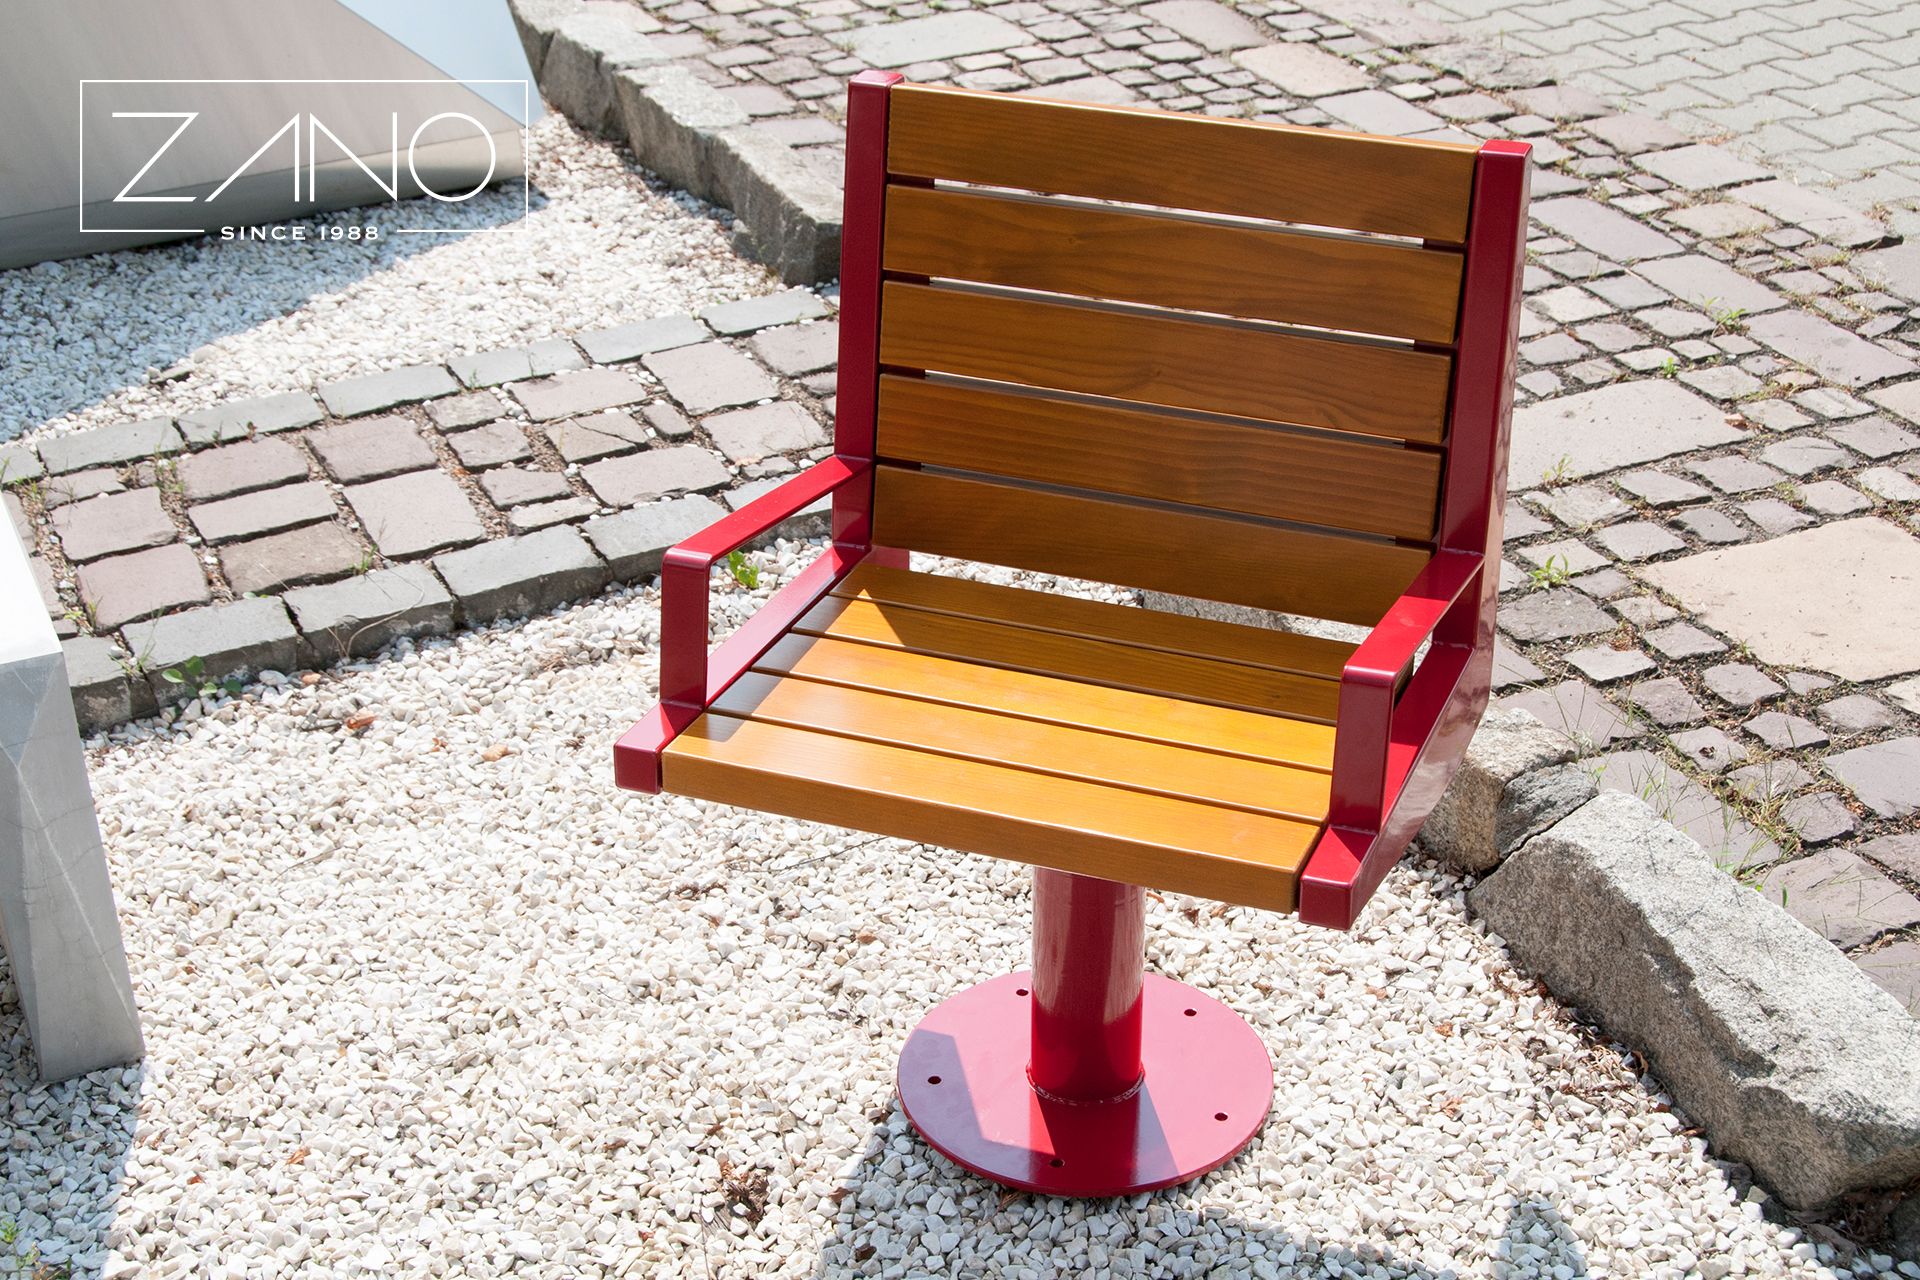 Simple, modern, colorful park furniture by ZANO Street Furniture